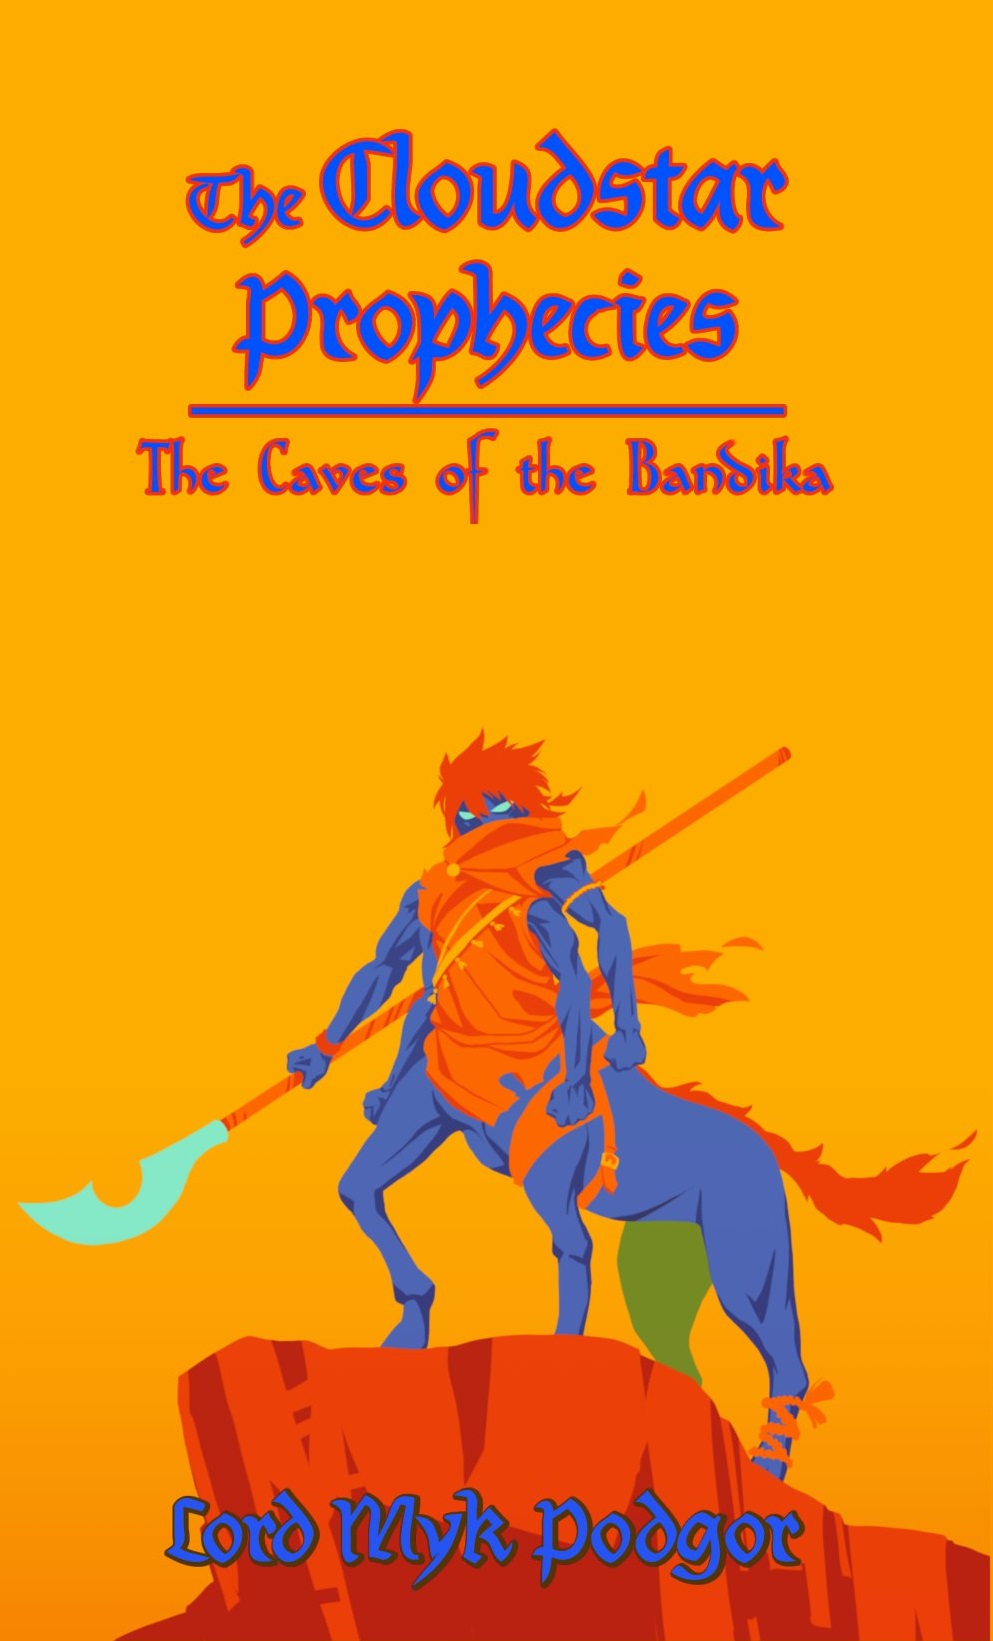 Announcing THE CLOUDSTAR PROPHECIES: THE CAVES OF THE BANDIKA